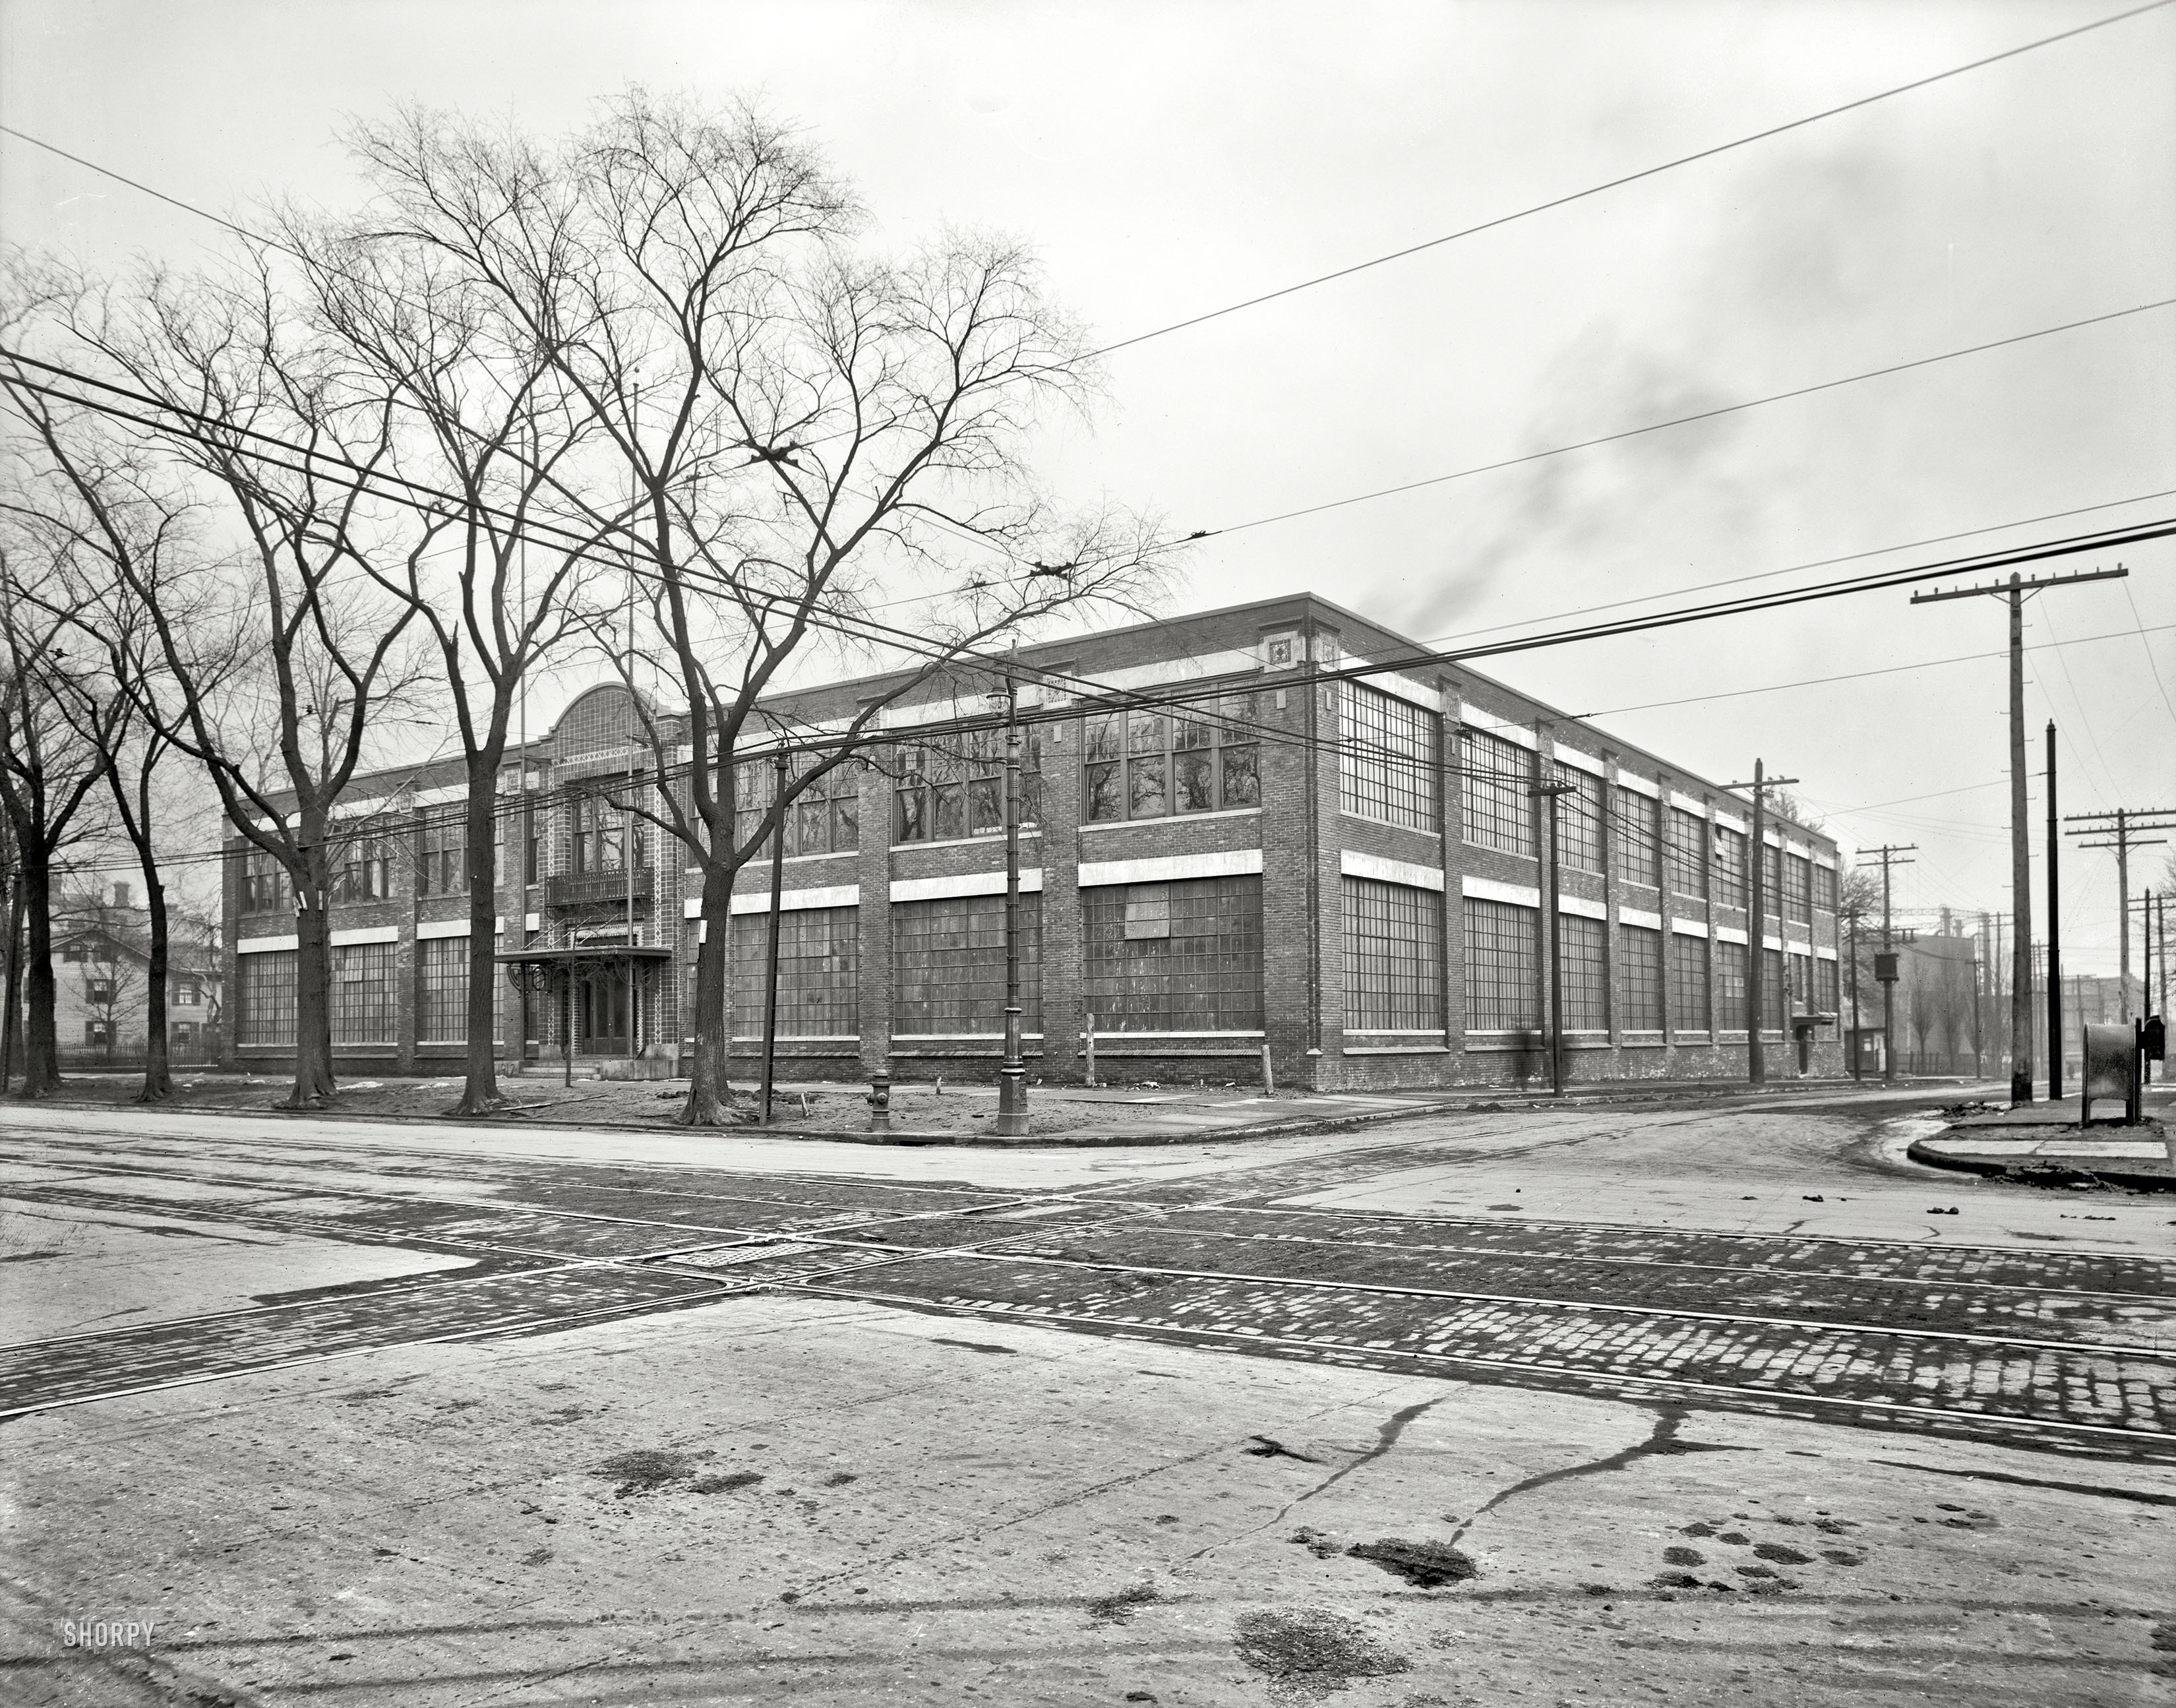 "A.J. Smith Construction Co." An industrial building somewhere in Detroit circa 1912. 8x10 inch glass negative, Detroit Publishing Company. View full size.